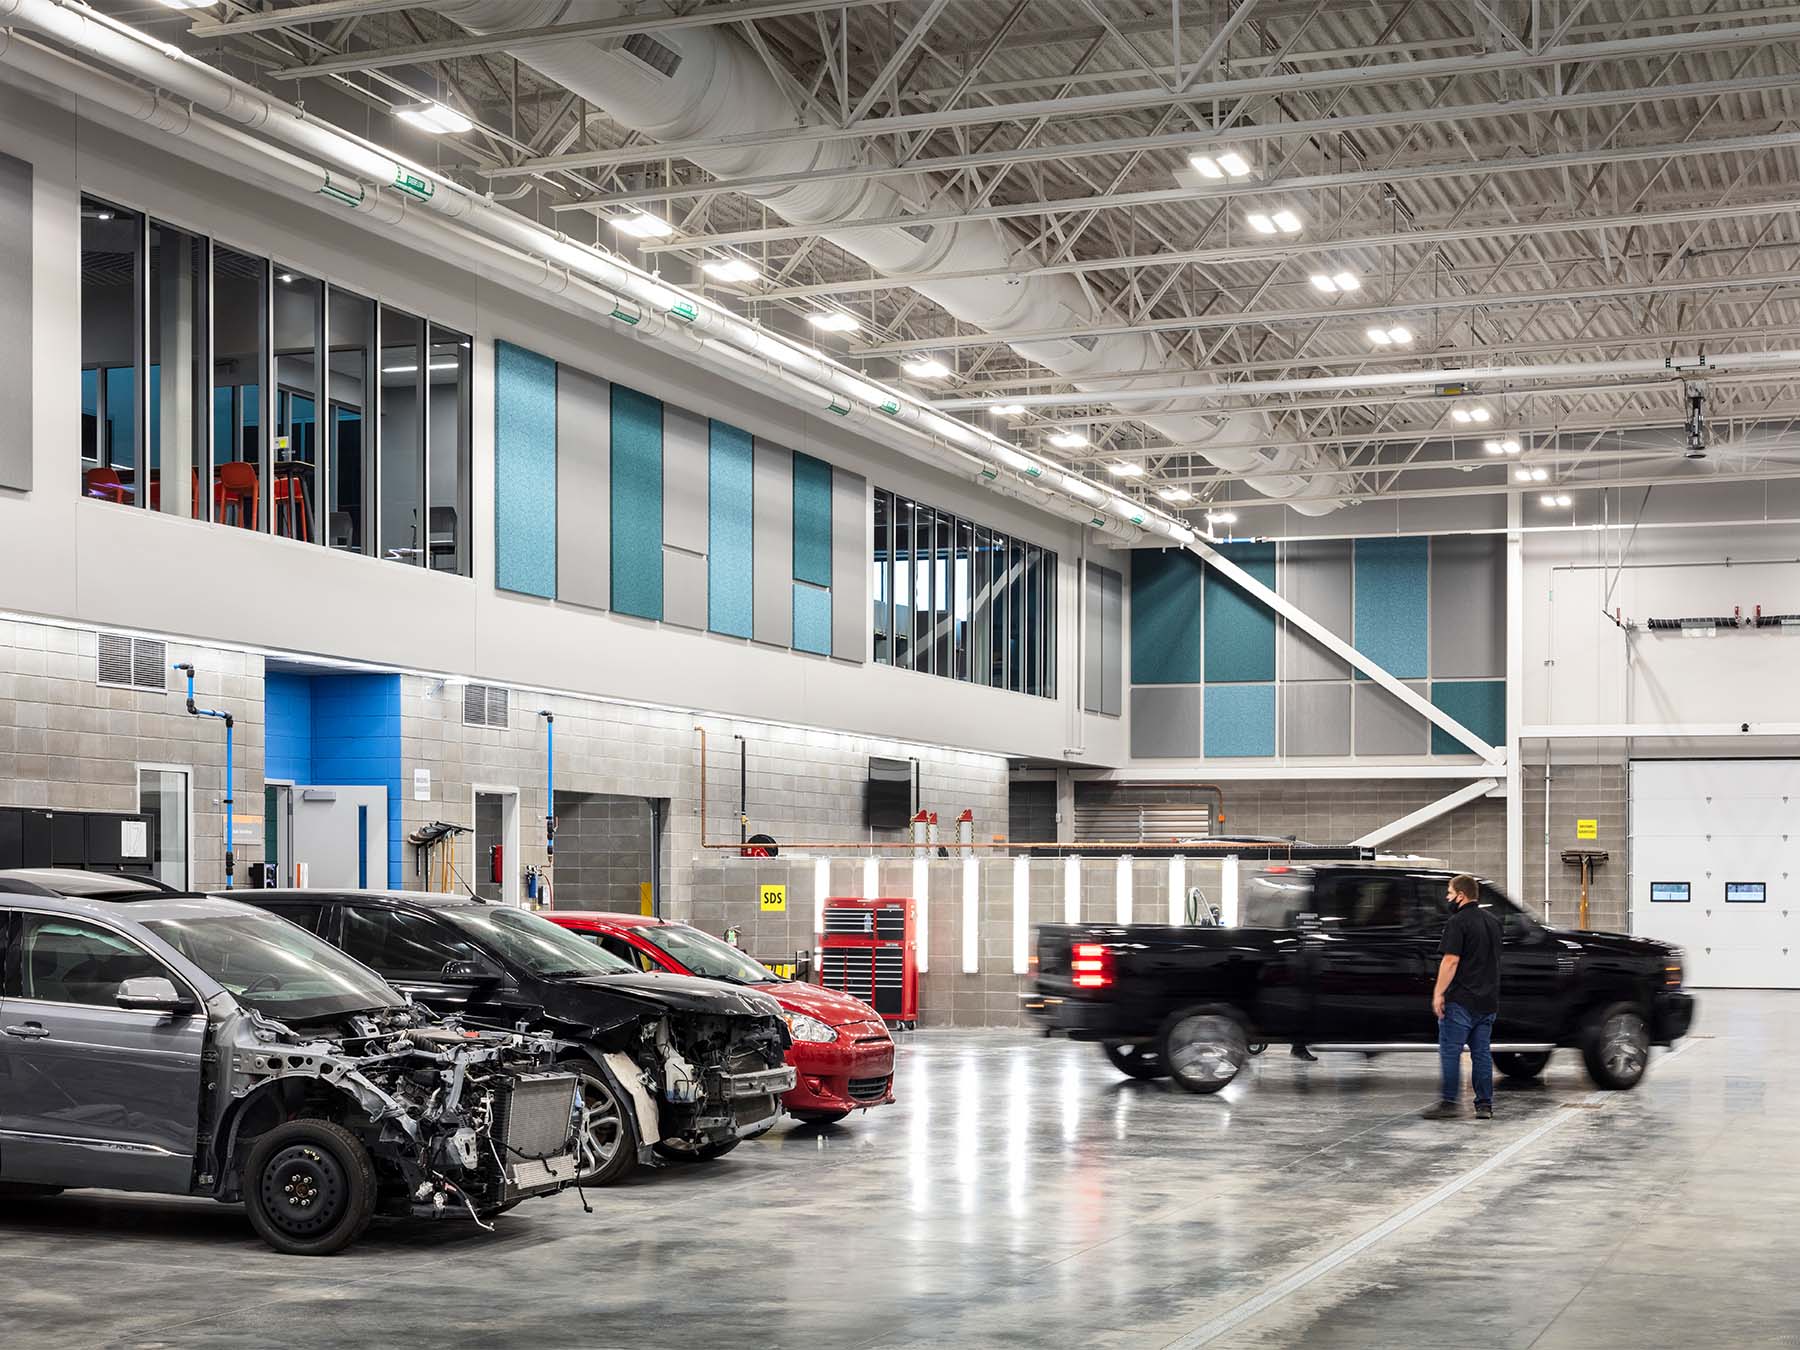 A view of open bays at MCC's Automotive Training Center